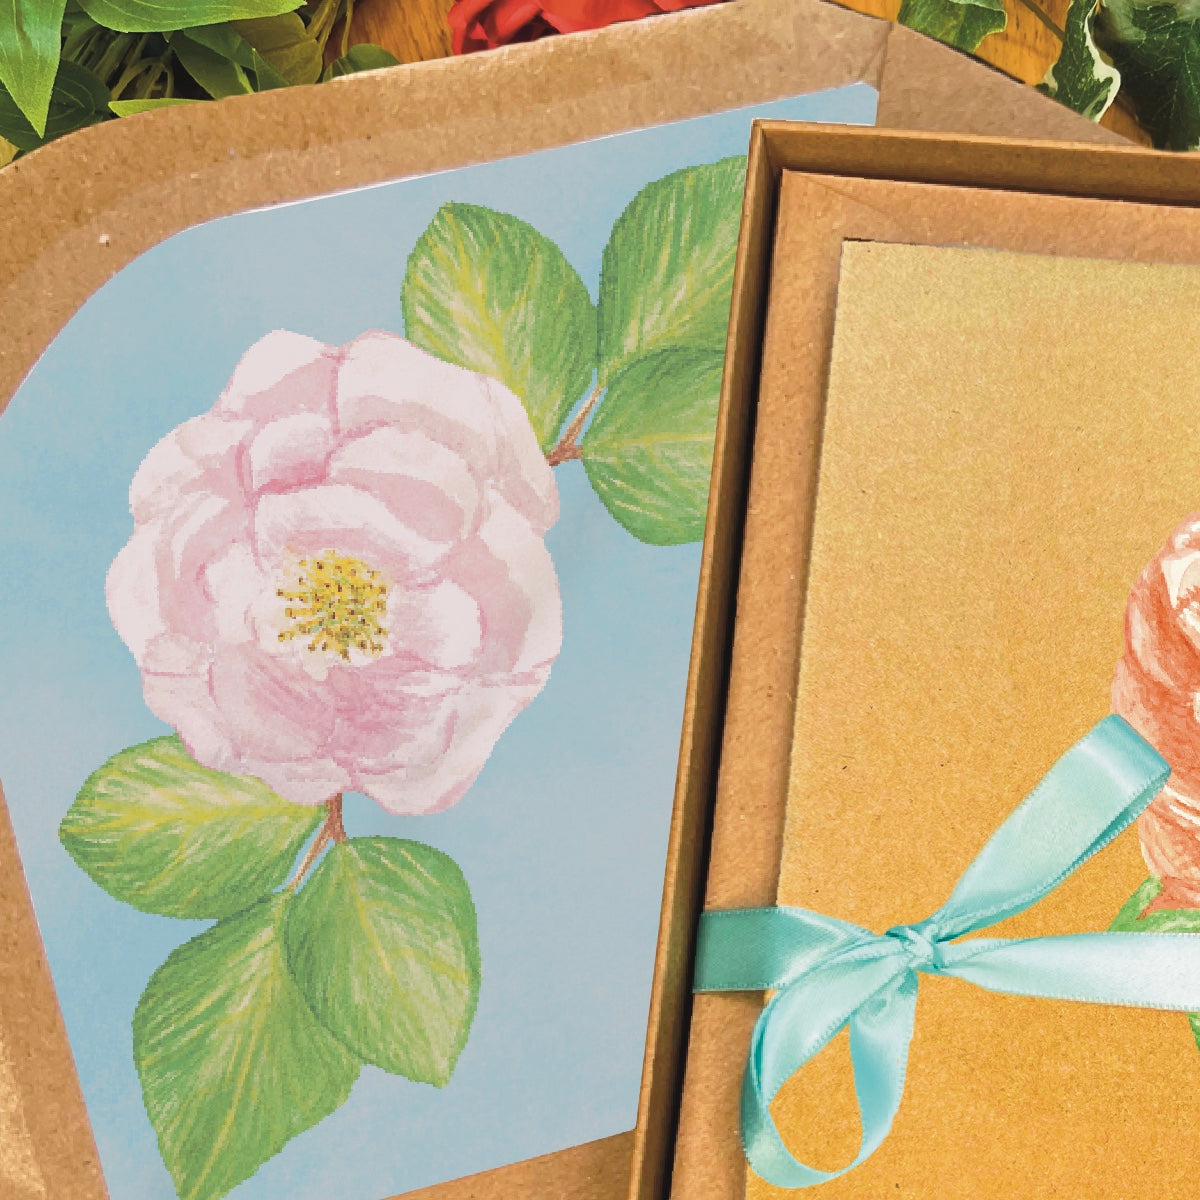 Pink Rose Greetings Card (Customisable)